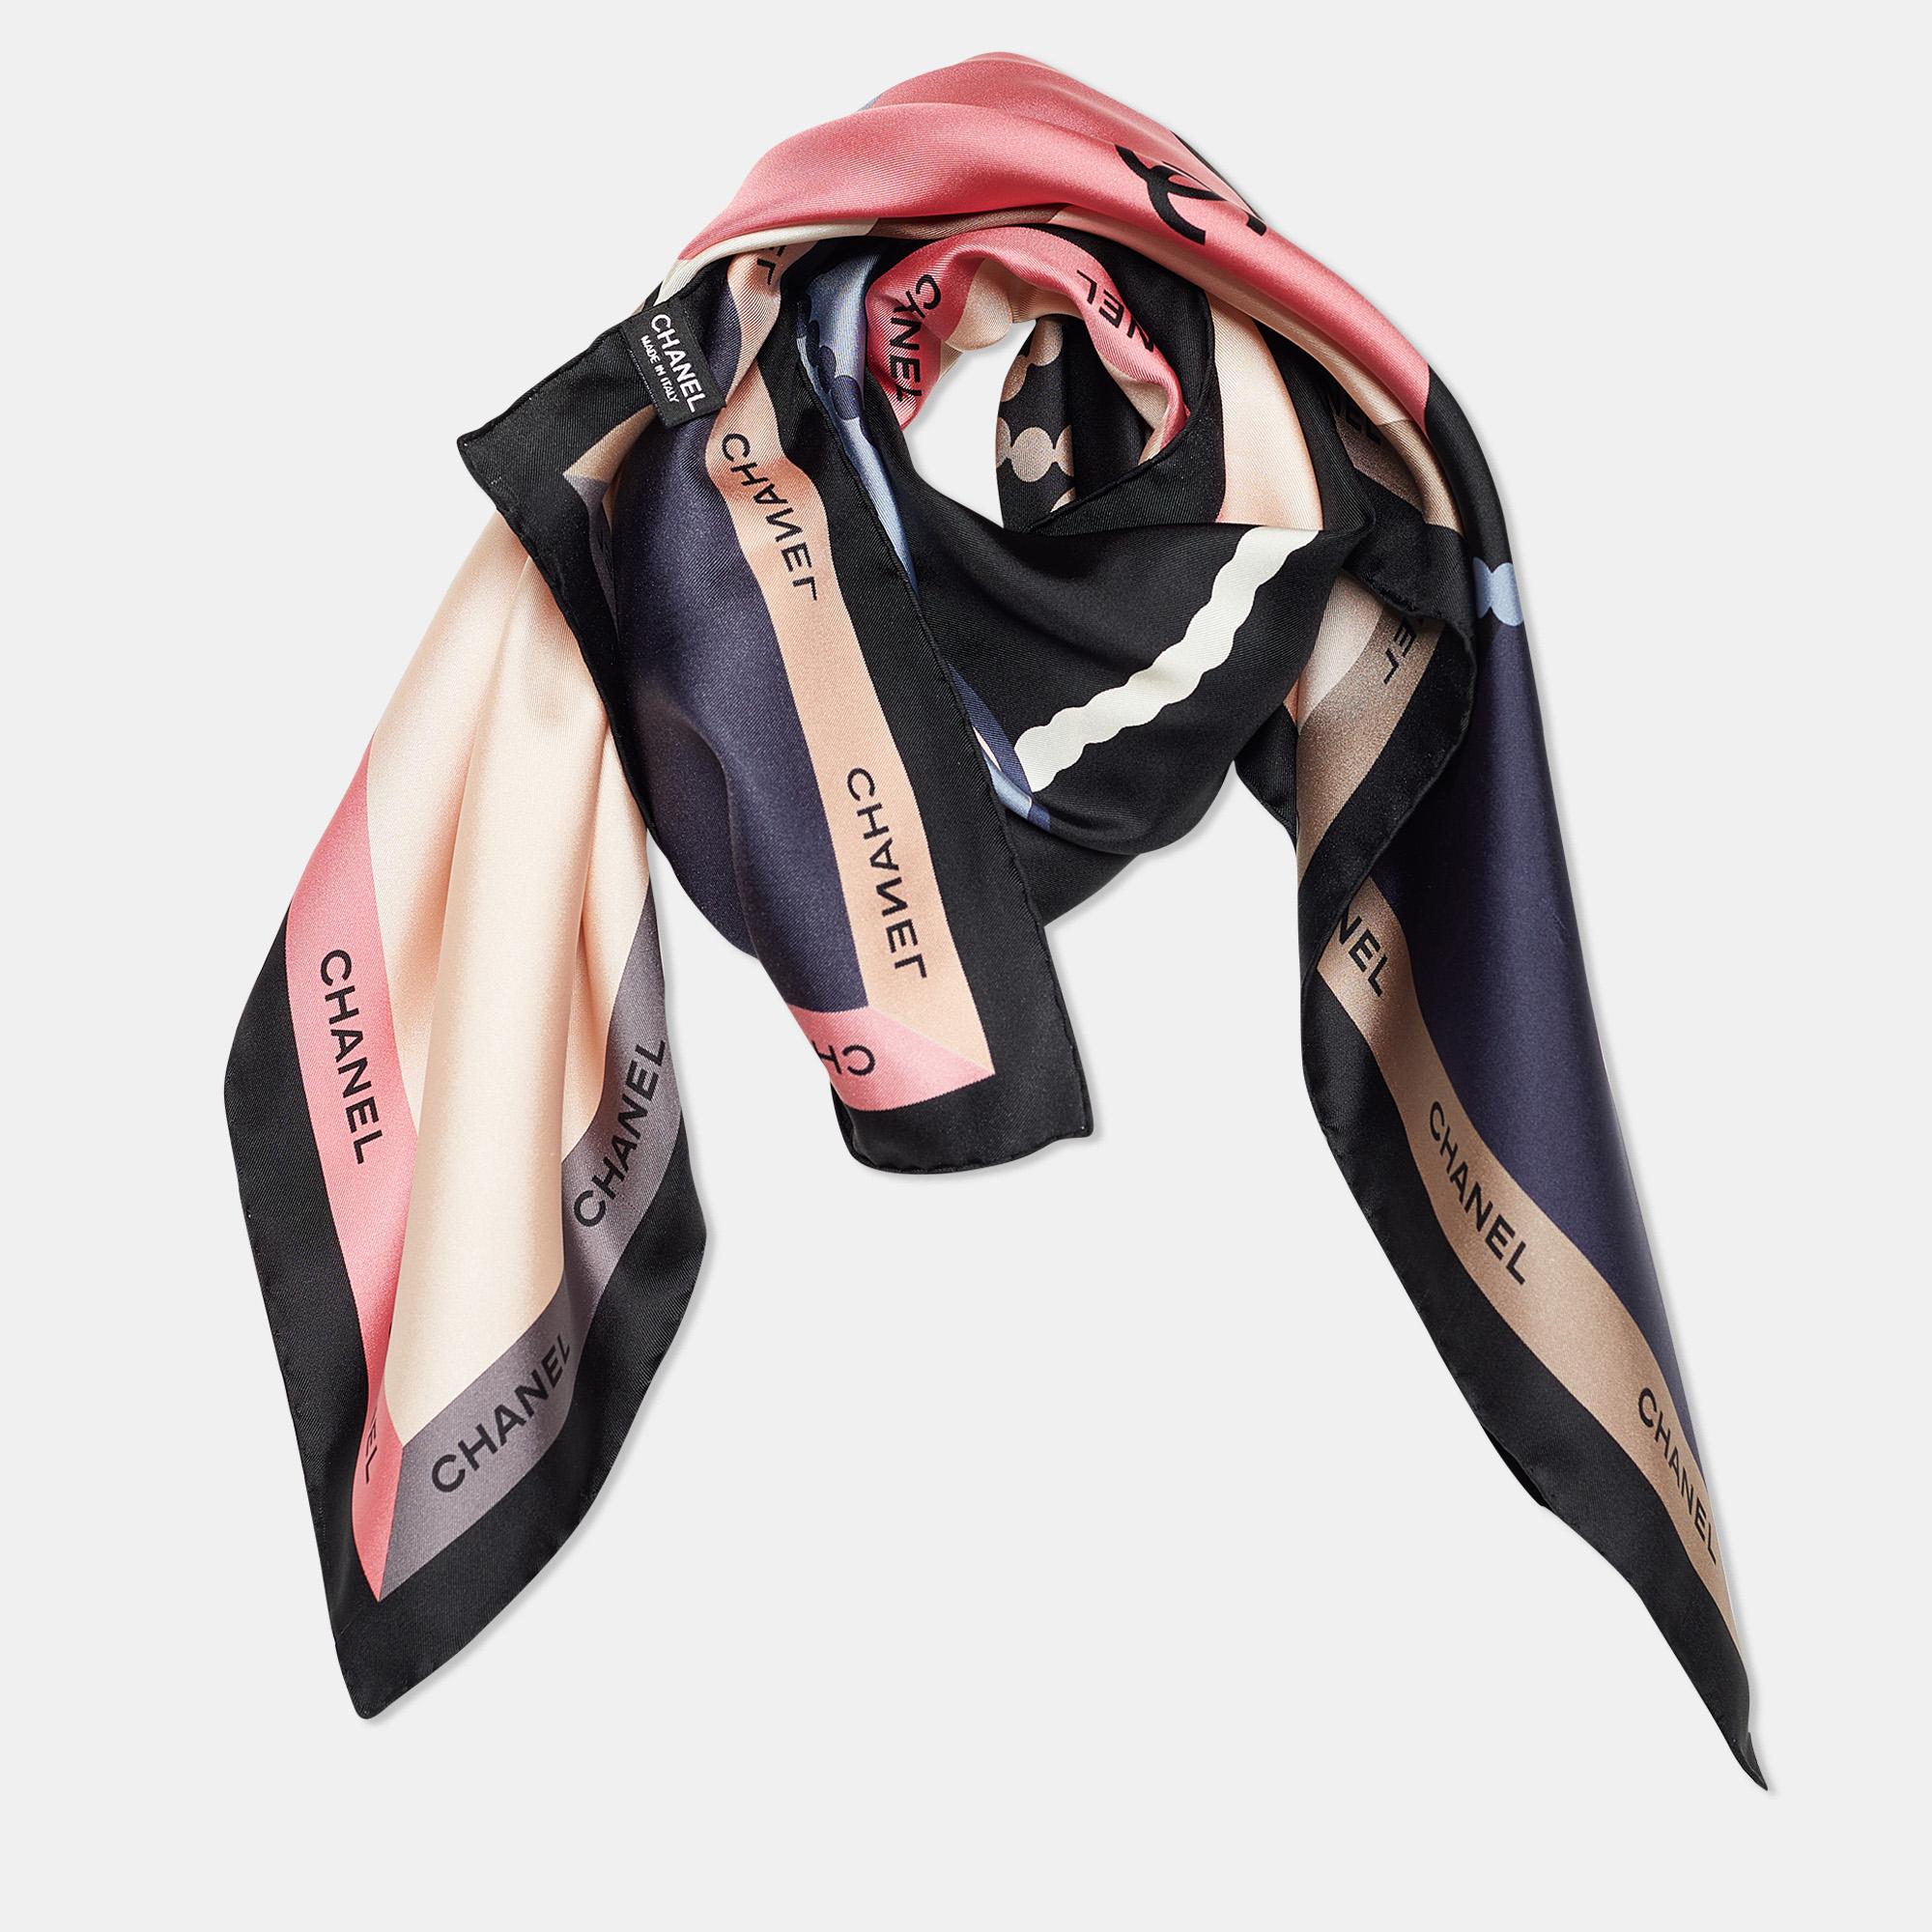 The perfect punctuation to your stylish look will be this Chanel scarf! It has been stitched using soft silk in multiple shades and adorned with iconic Chanel bag prints all over. Wrap it around your neck to accessorize the chic way!

